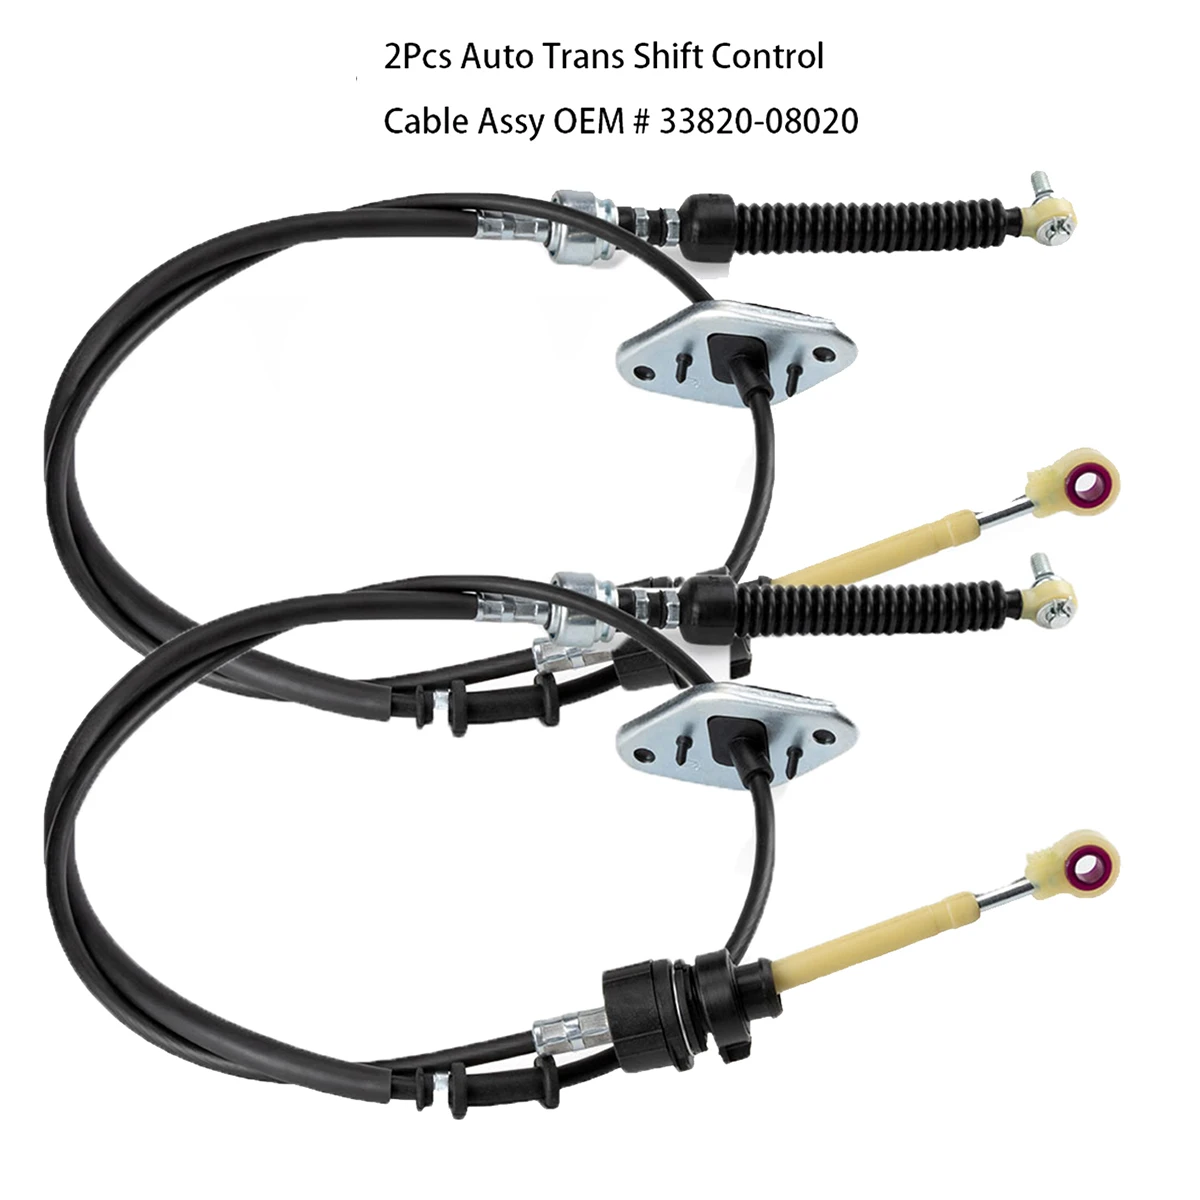 

2Pcs 33820-08020 Transmission Control Cable Assembly for Toyota Sienna 2004-2010 Auto Trans Shift Control Wires Gearbox